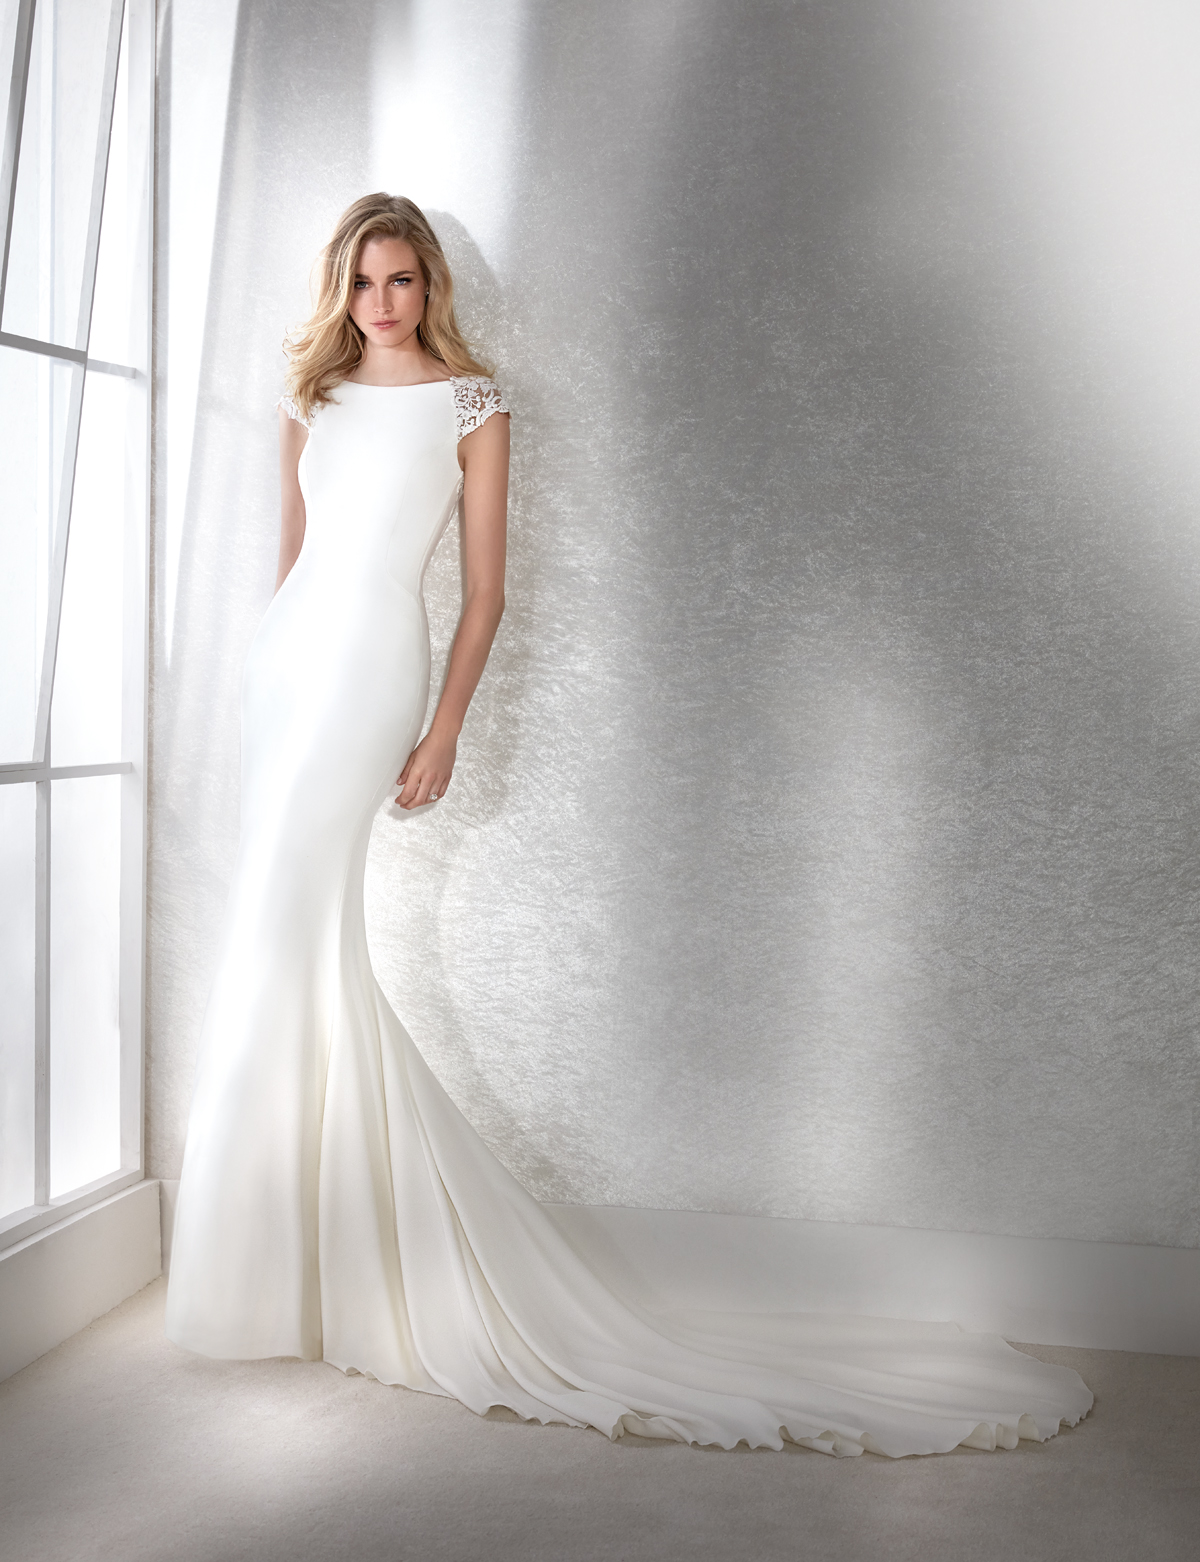 Fresh & Modern Bridalwear - Introducing White One Collection By St. Patrick (Bridal Fashion )